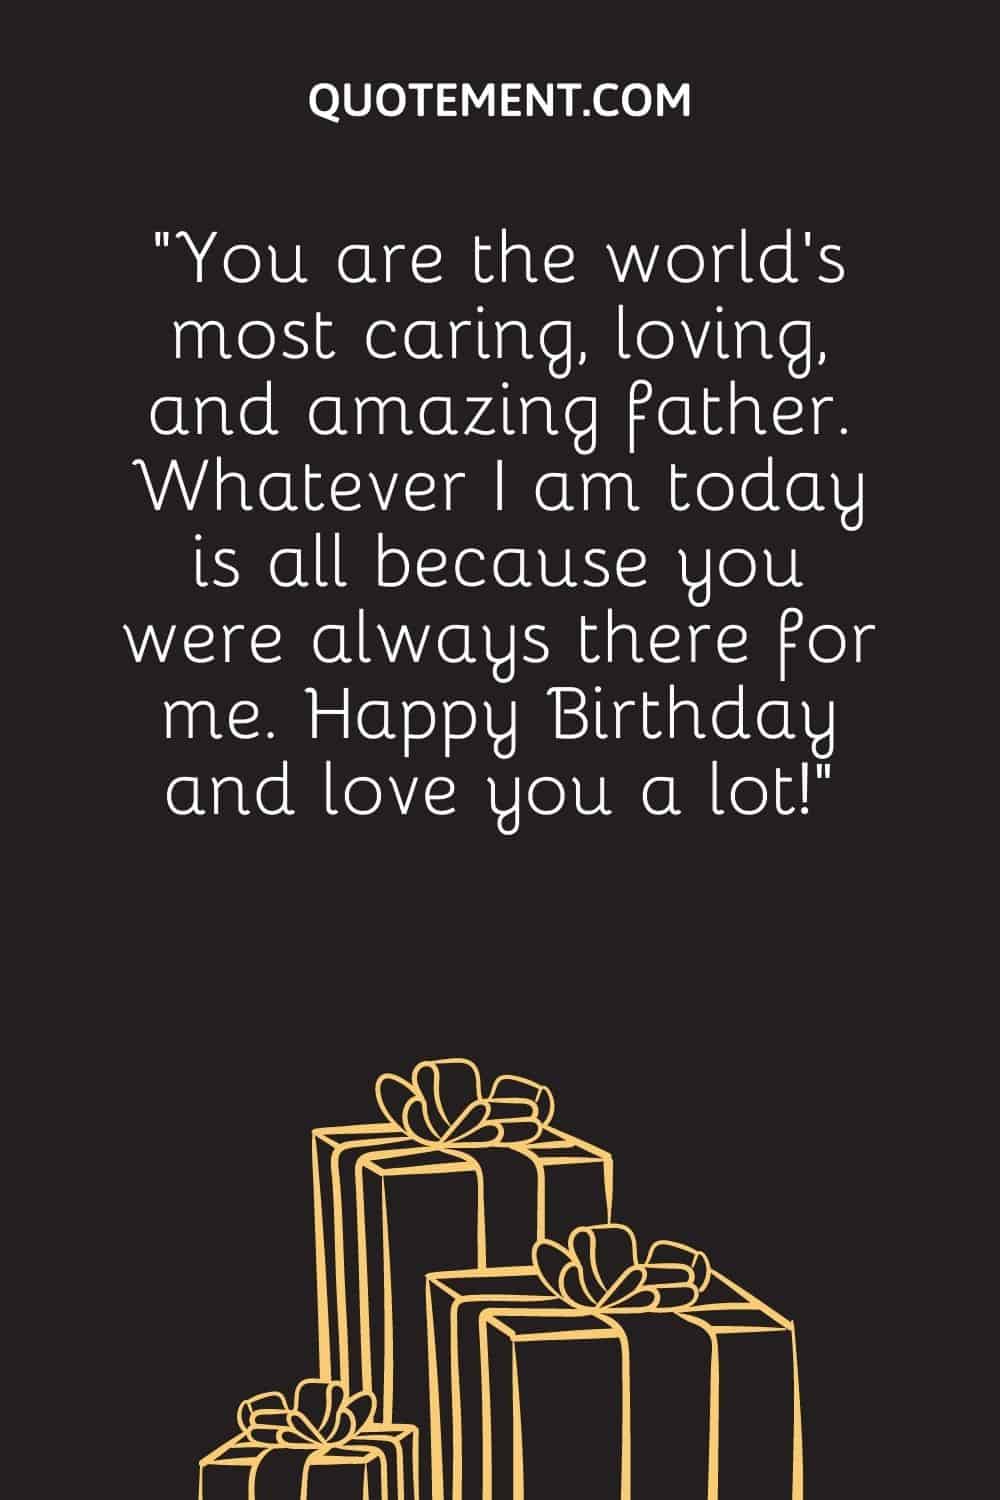 “You are the world’s most caring, loving, and amazing father. Whatever I am today is all because you were always there for me. Happy Birthday and love you a lot!”